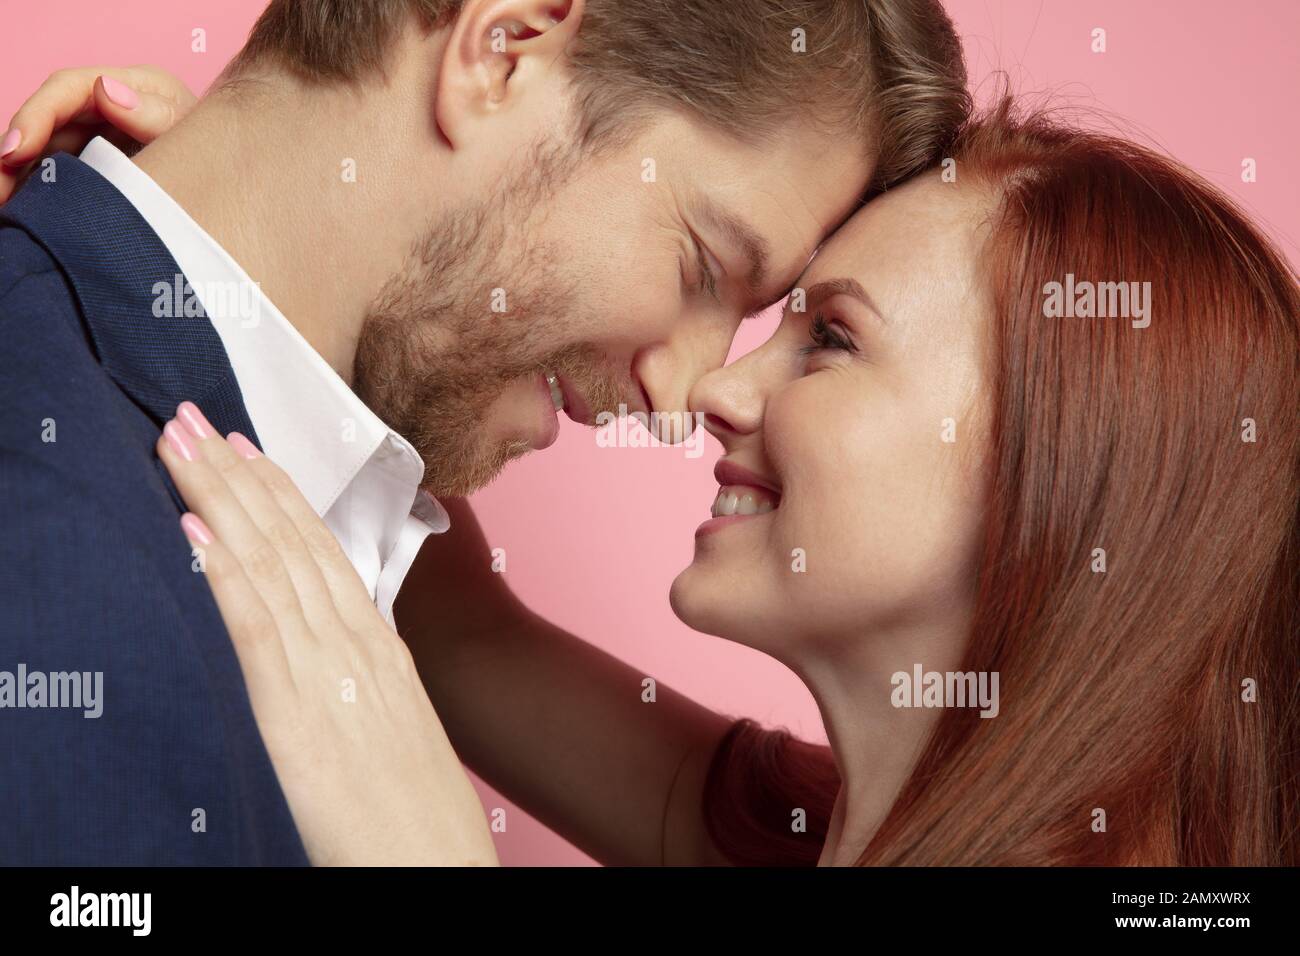 Valentine's day celebration, close up of caucasian couple's kissing and smiling on coral studio background. Concept of human emotions, facial expression, love, relations, romantic holidays. Stock Photo